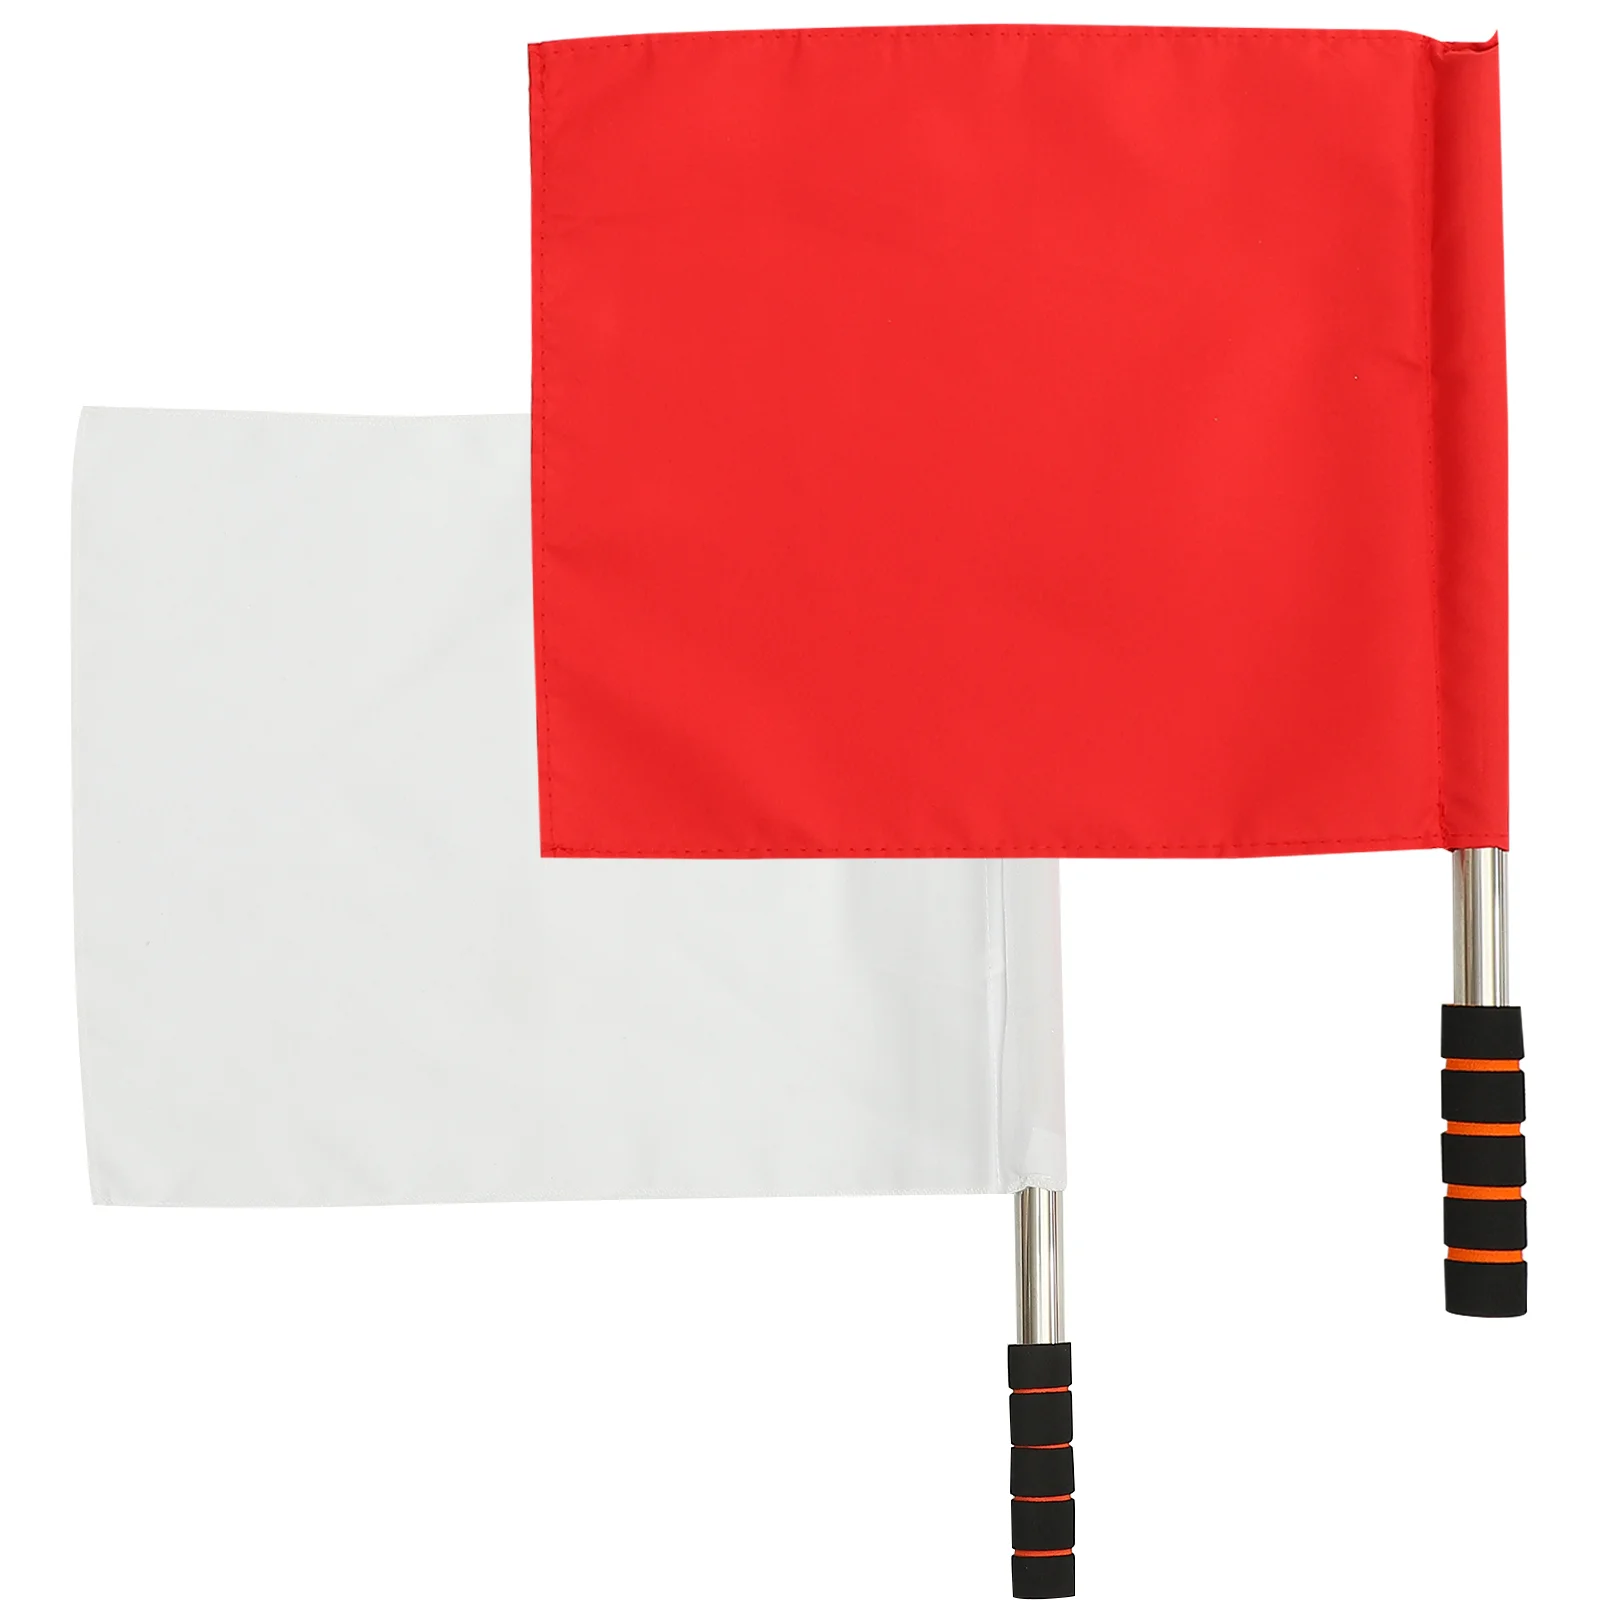 

2 Pcs Referee Border Flag Outdoor Signs Traffic Flags Match Signal Commanding Waving Cloth Conducting Safety Hand